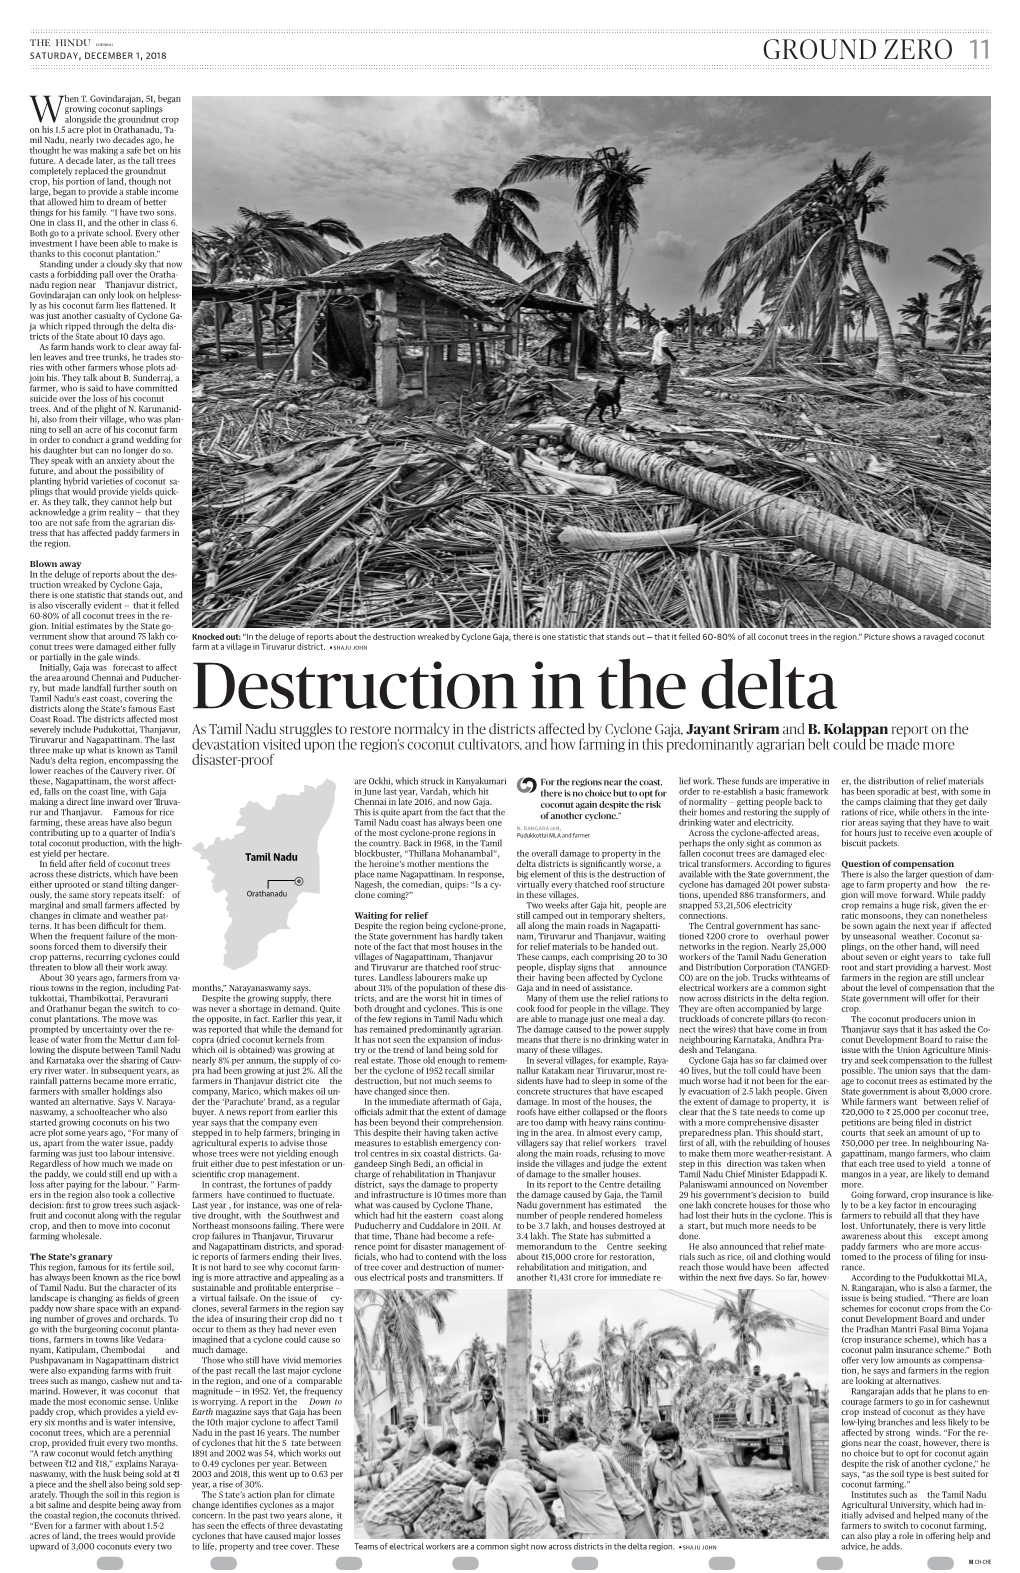 Destruction in the Delta Districts Along the State’S Famous East Coast Road